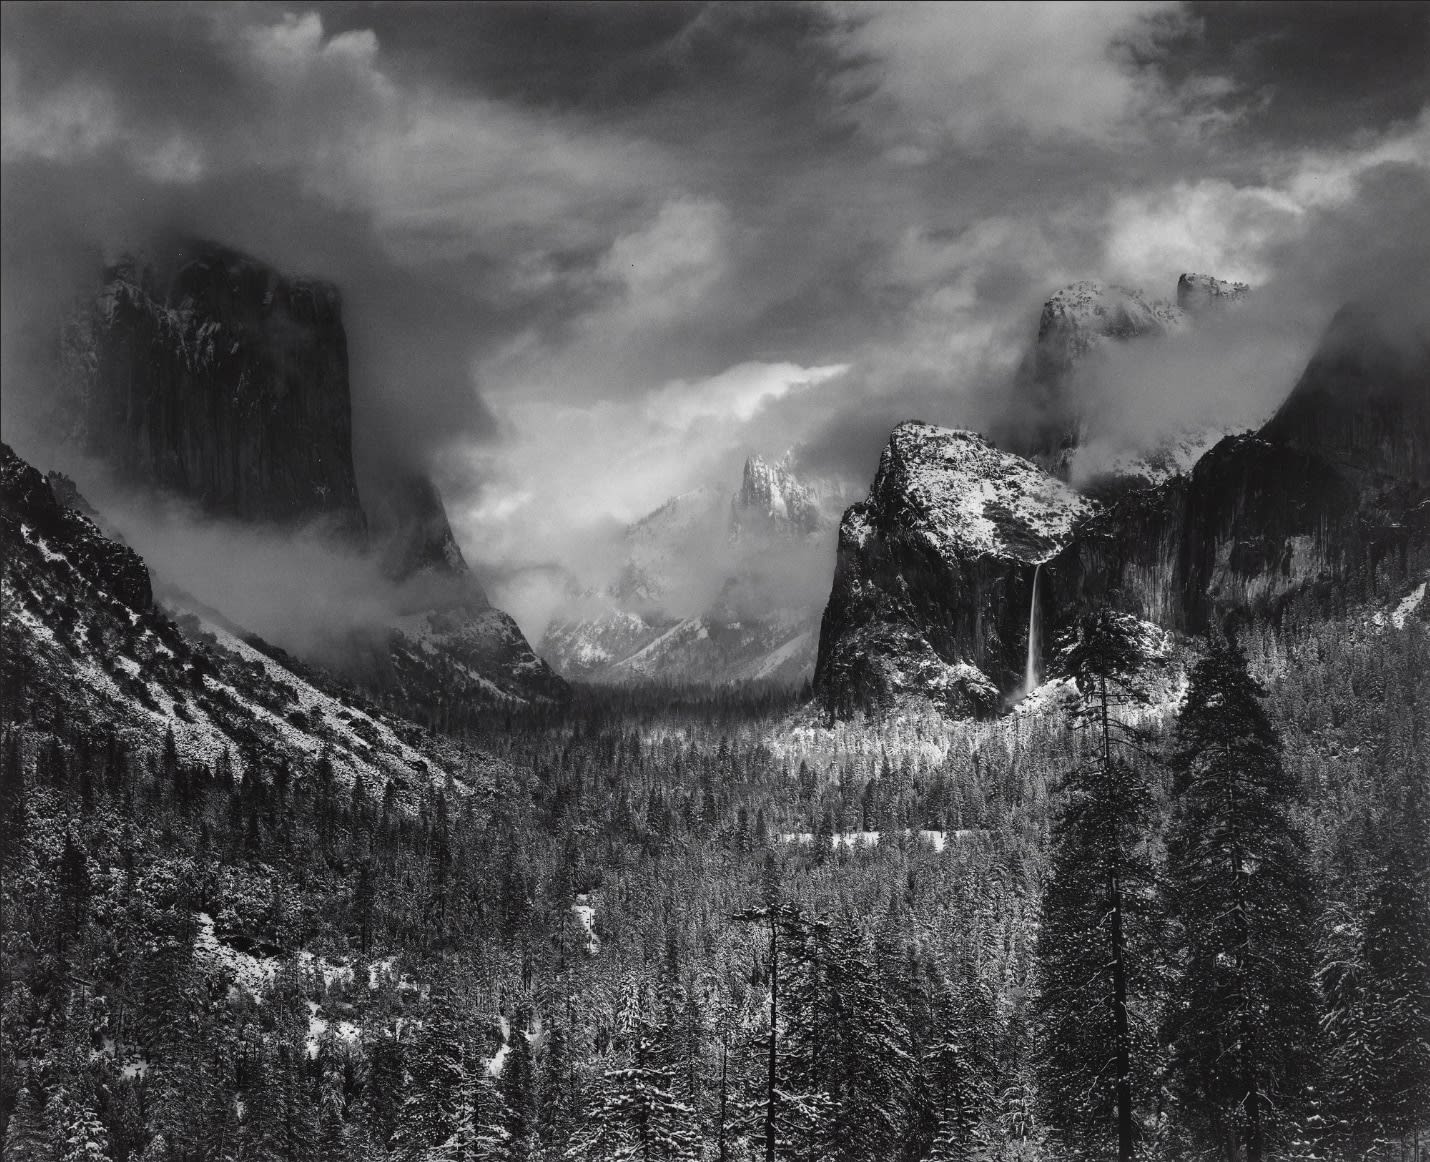 Ansel Adams, Winter Storm (clearing winter storm), 1944